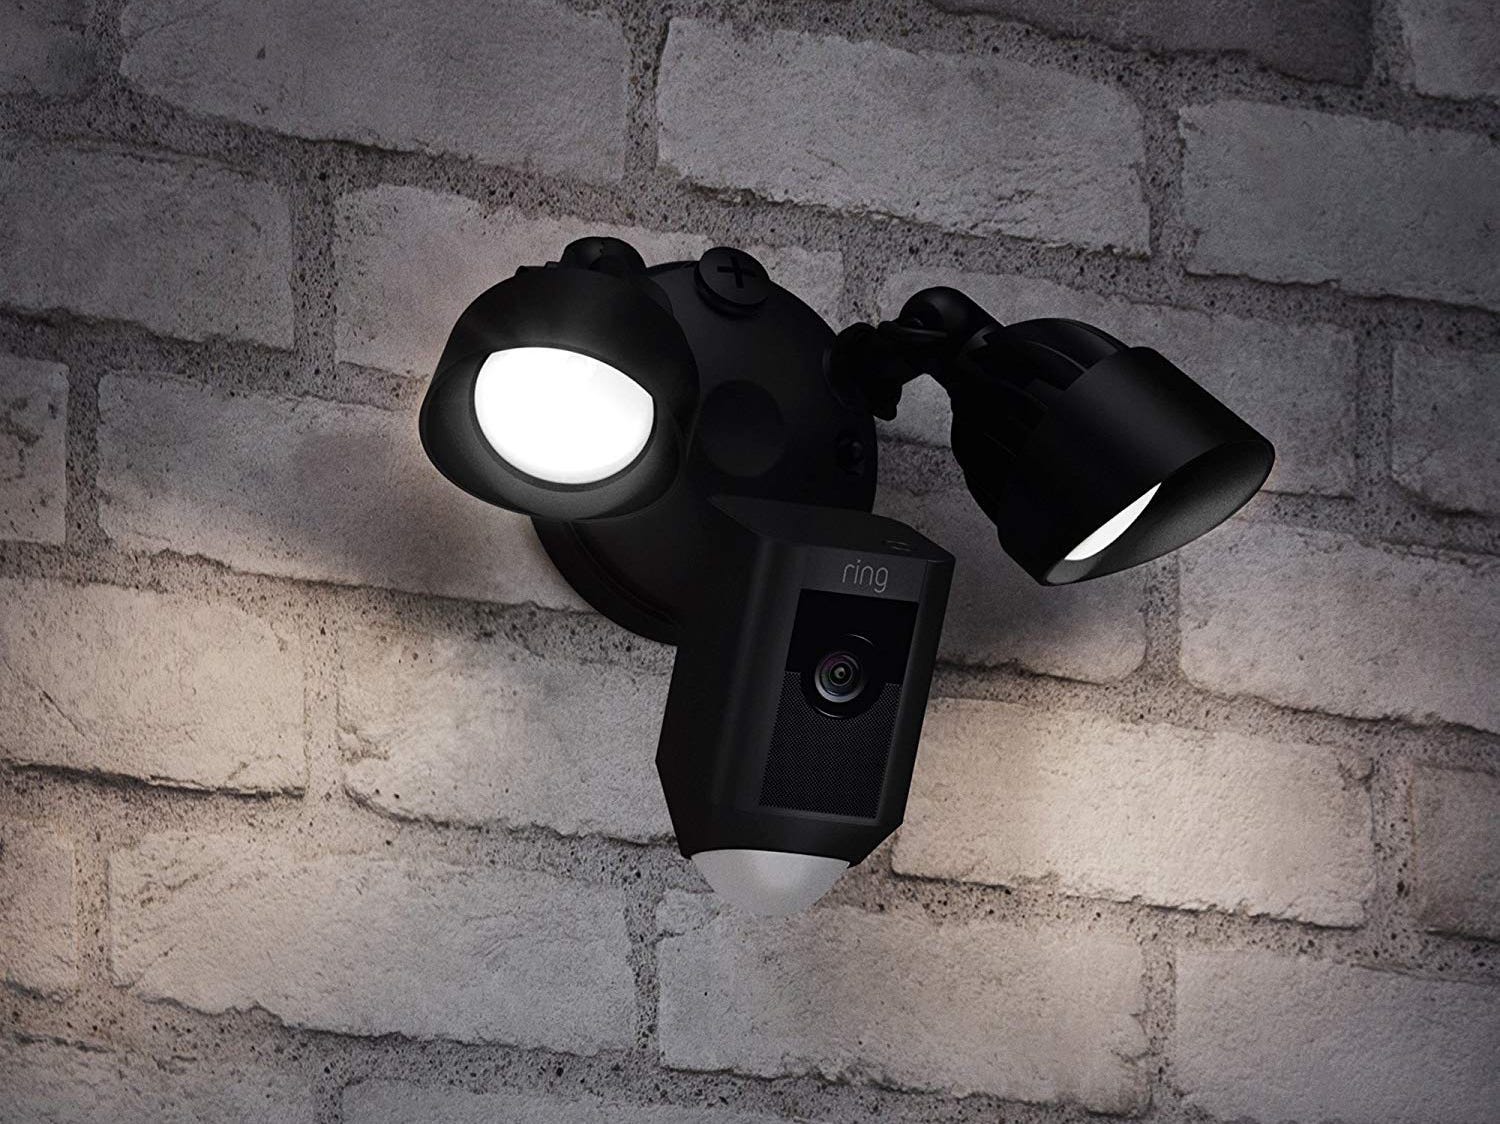 ring floodlight camera attached to a brick exterior wall of a house.